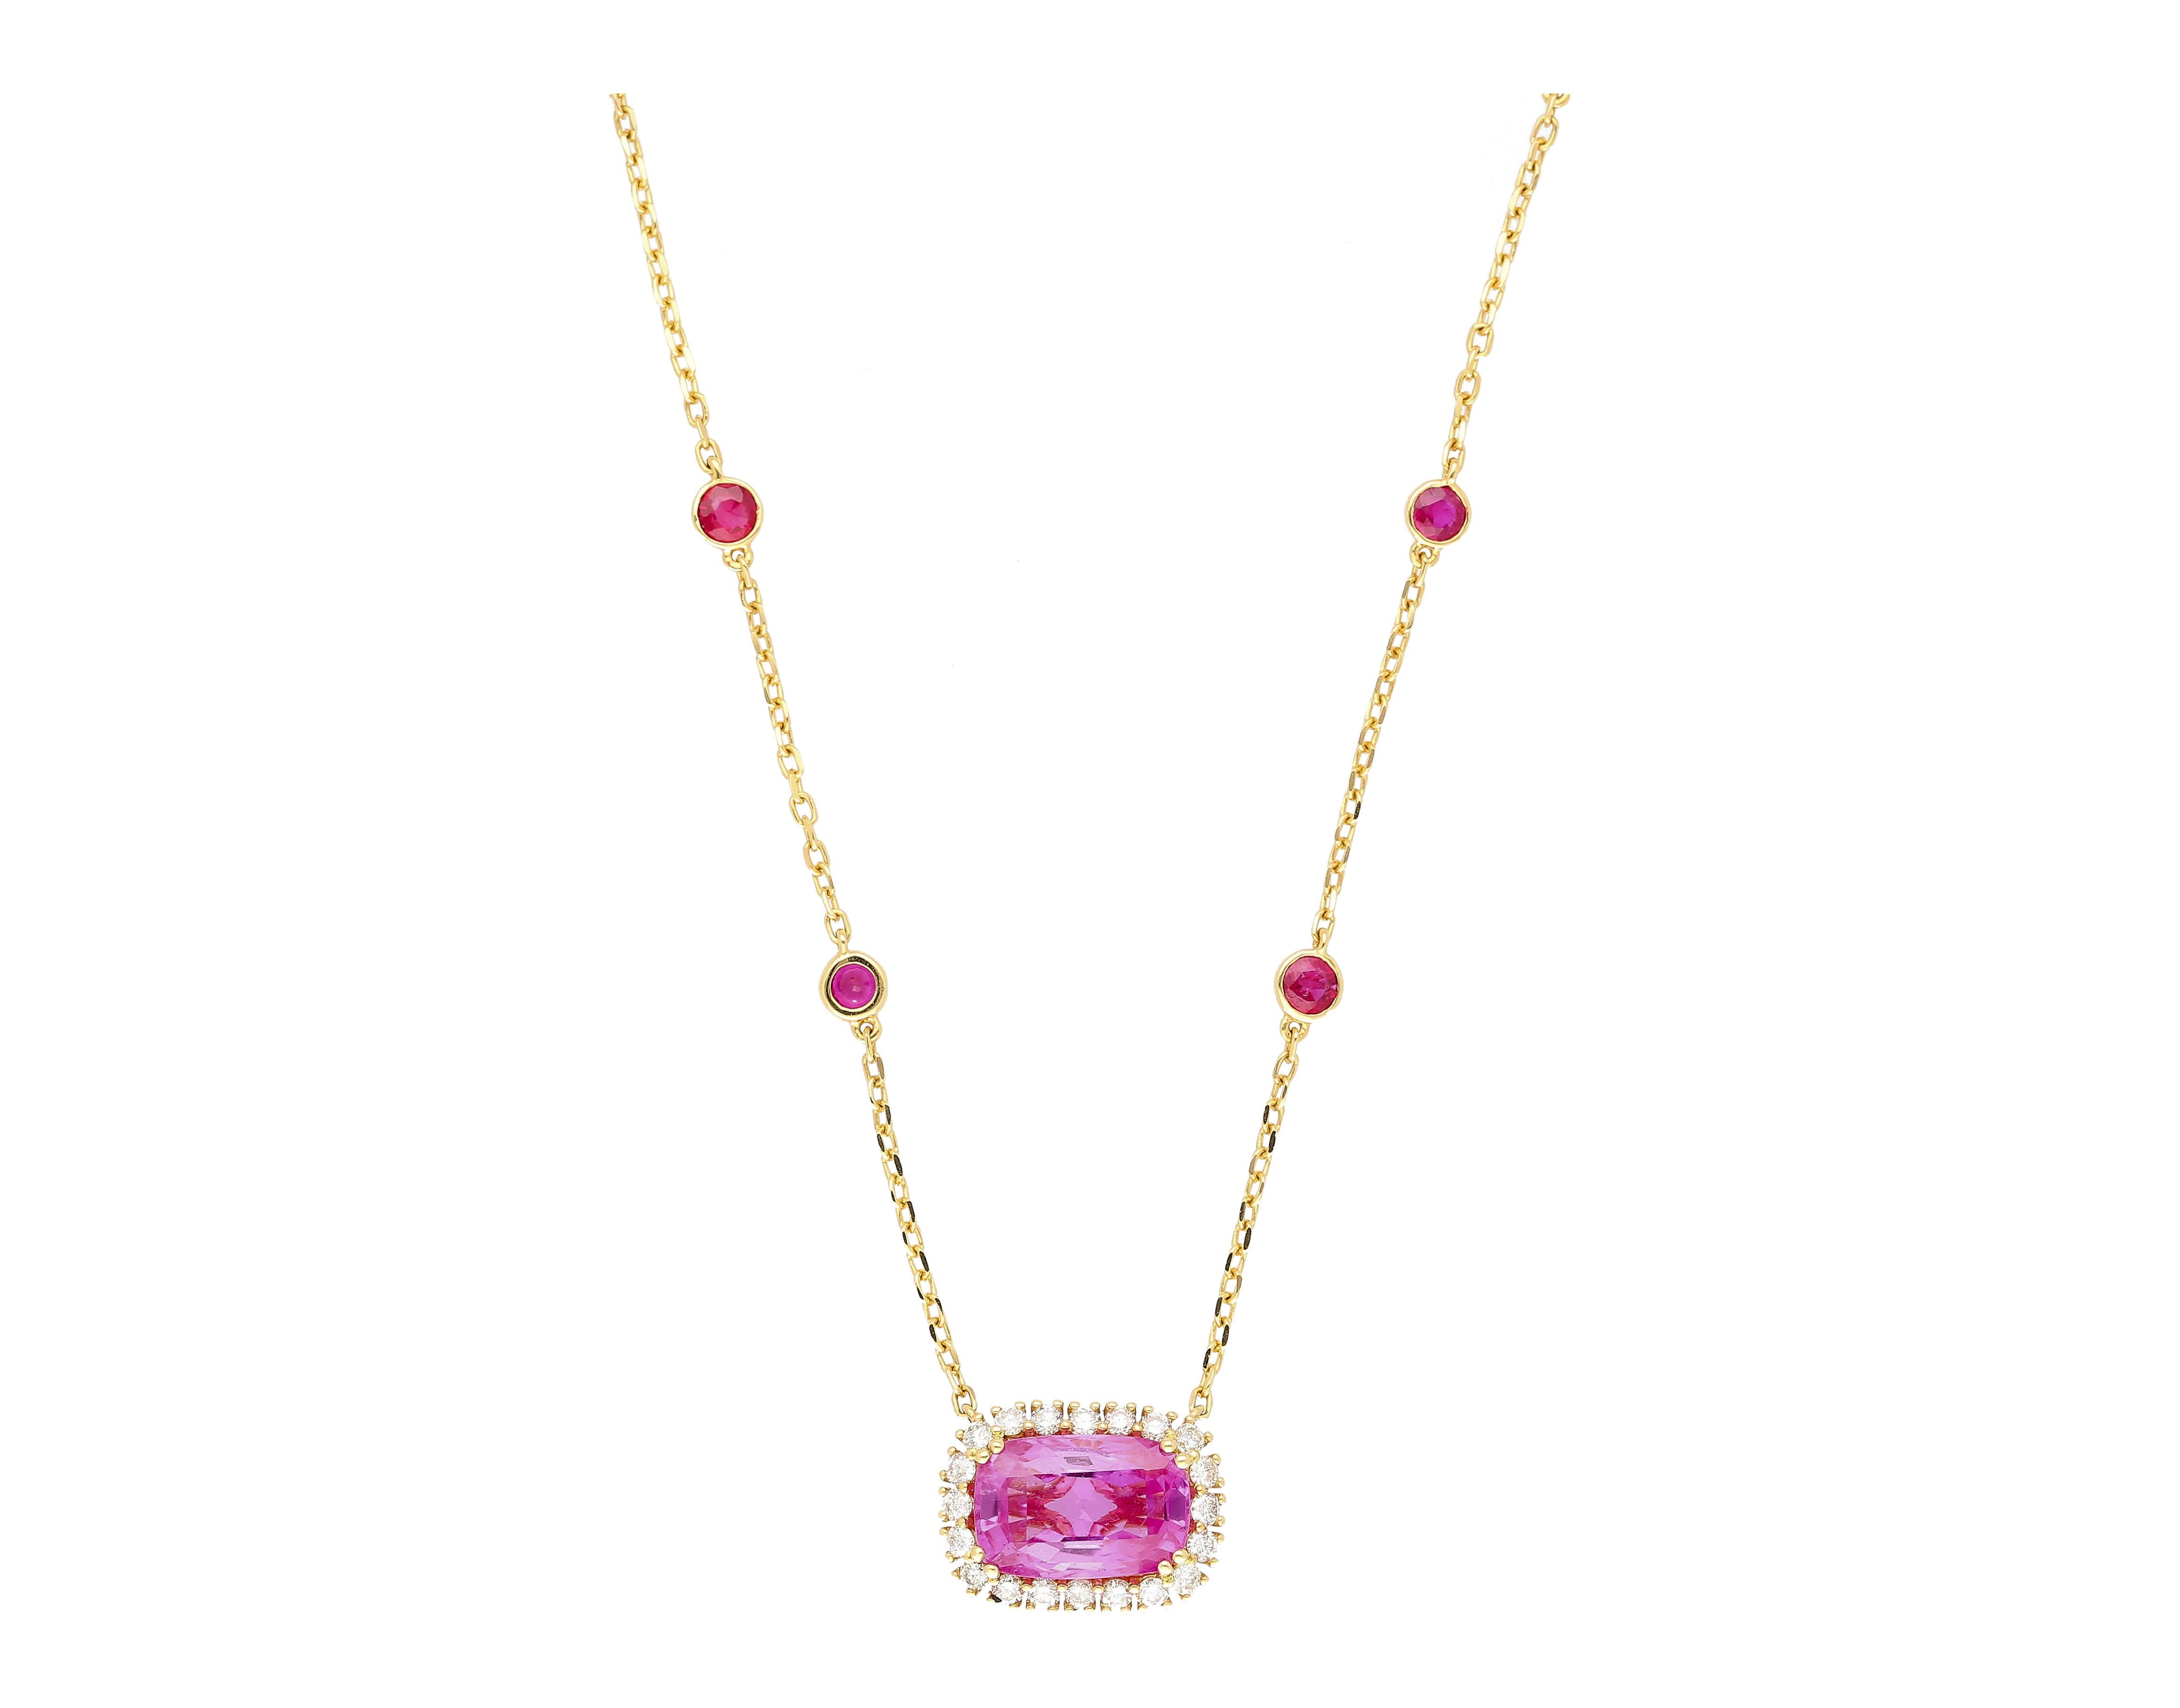 GRS certified 5.10 carat no heat cushion cut Ceylon origin pink sapphire necklace. The pink sapphire is prong set in 18k yellow gold and encompassed by 20 round cut diamonds that total 0.46 carats. On the chain of the necklace are 8 round cut rubies